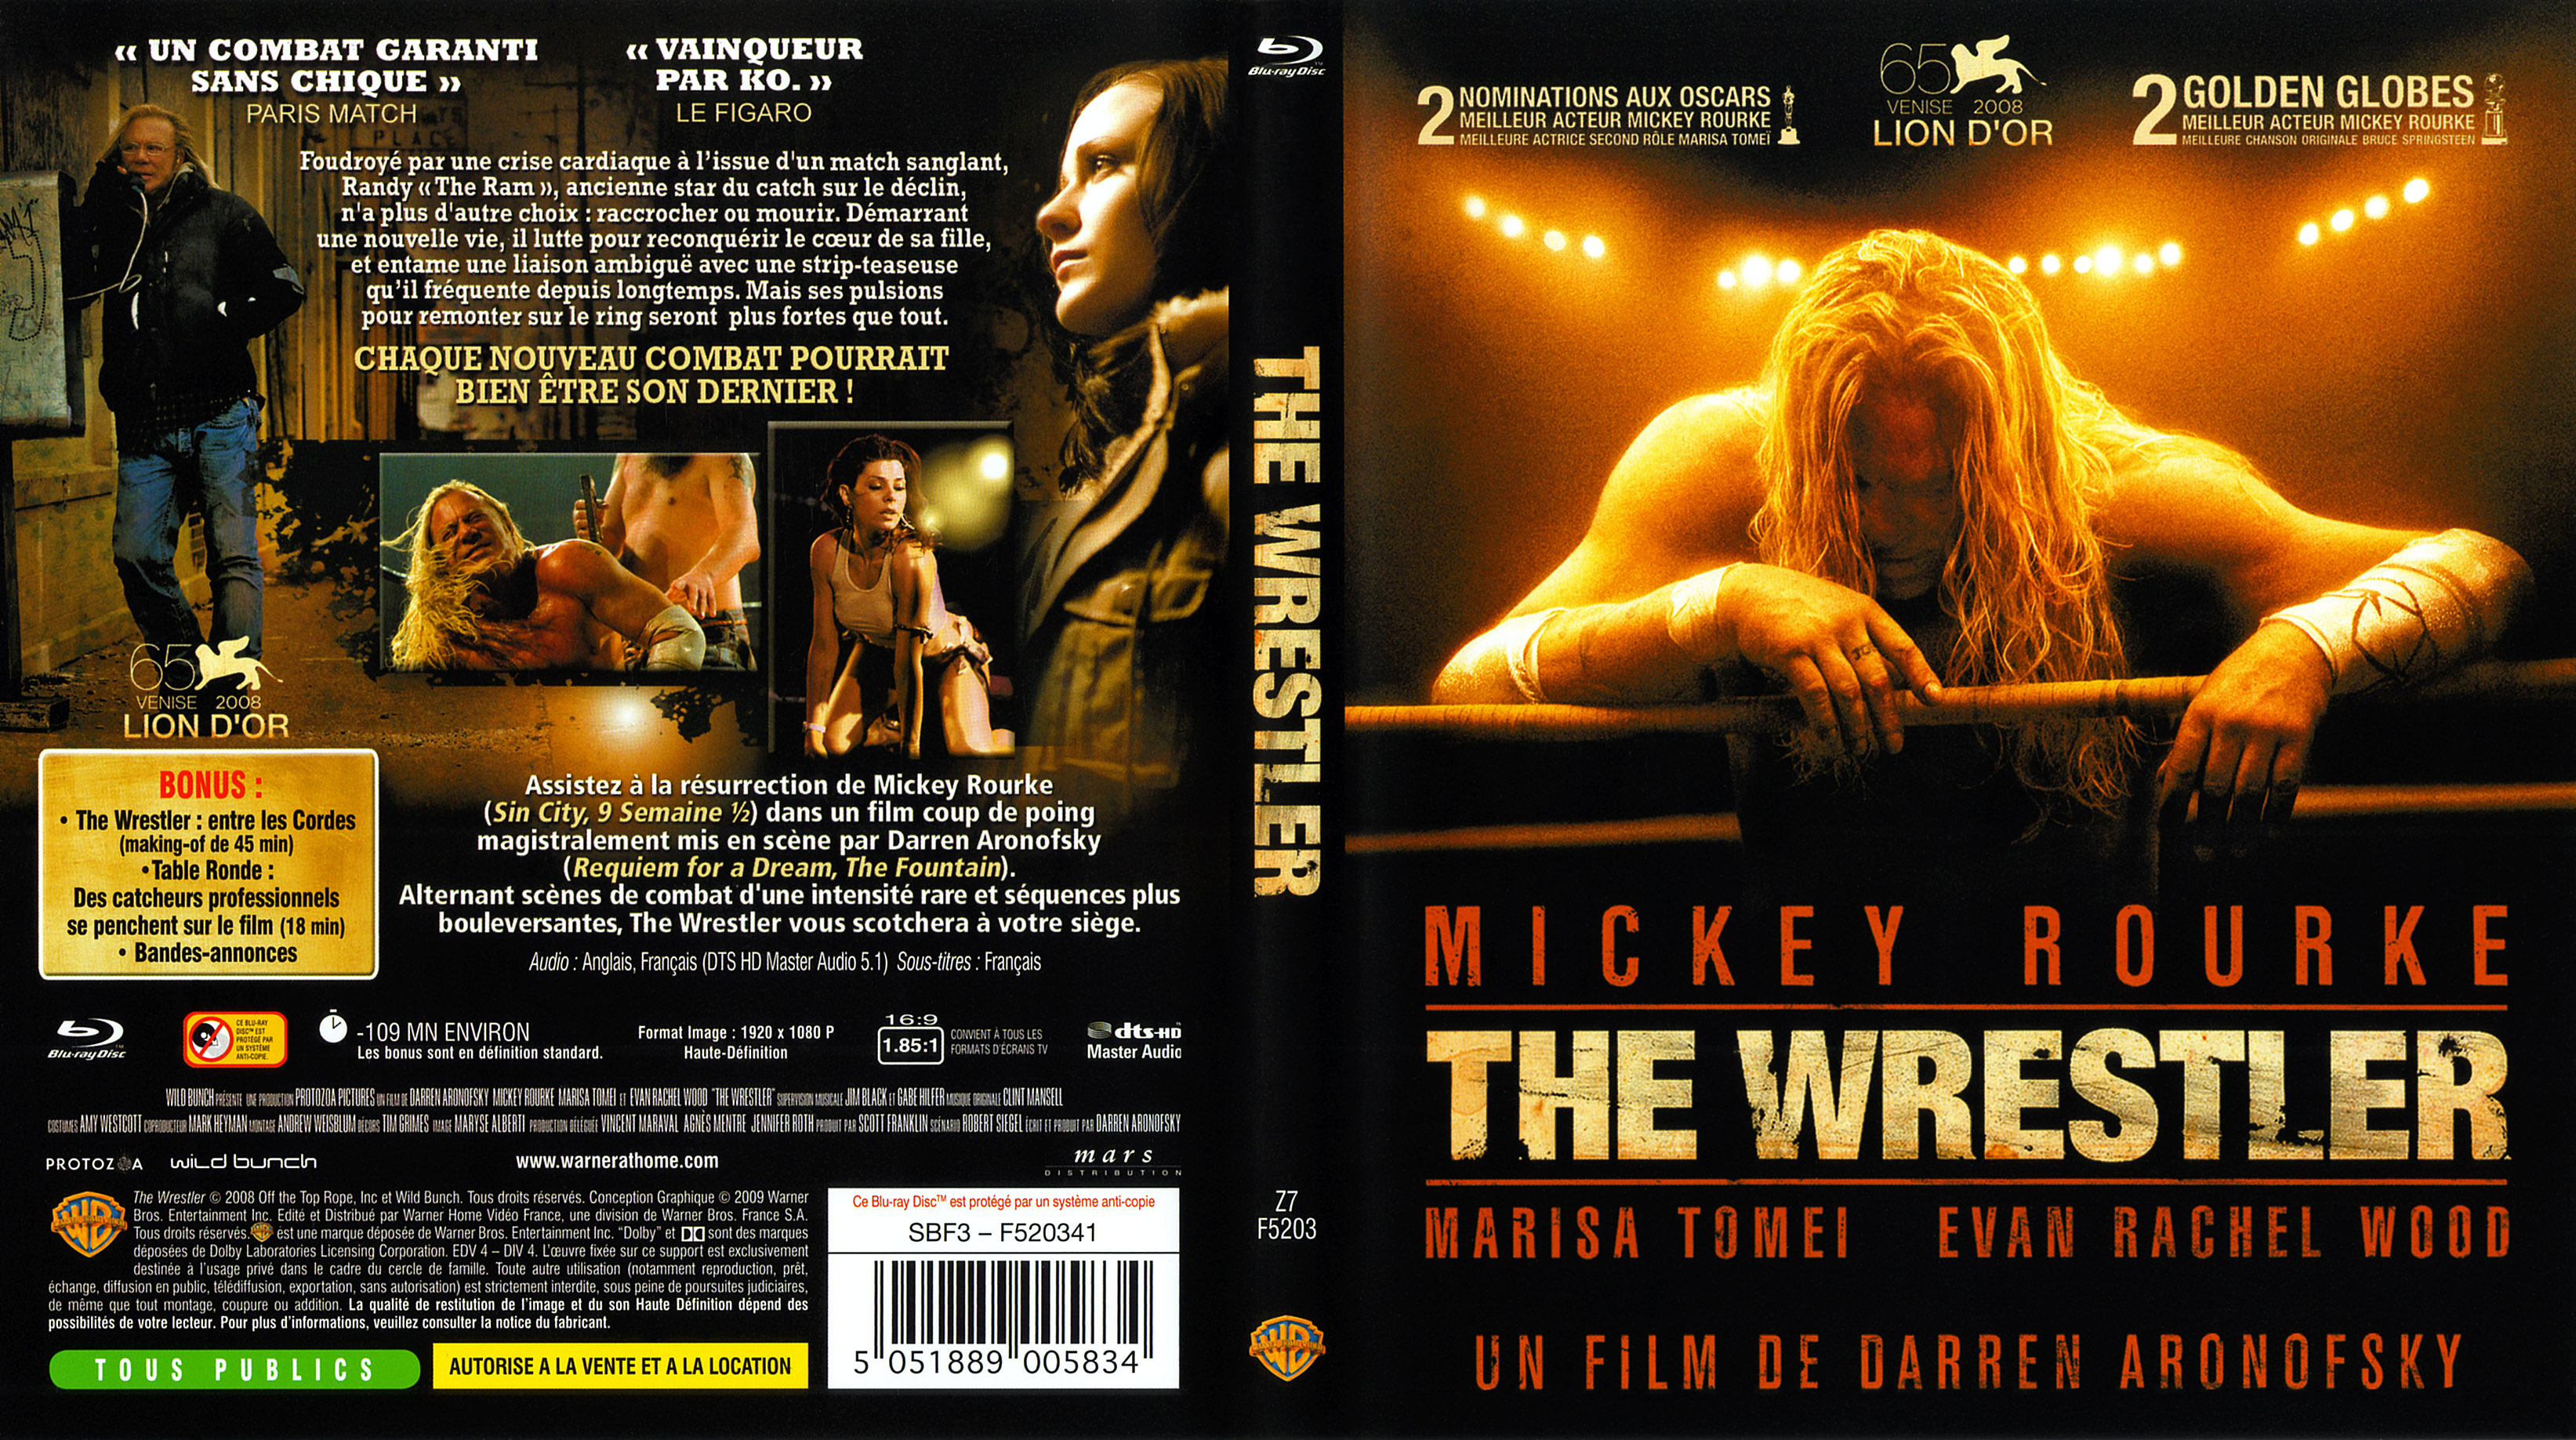 Jaquette DVD The wrestler (BLU-RAY)